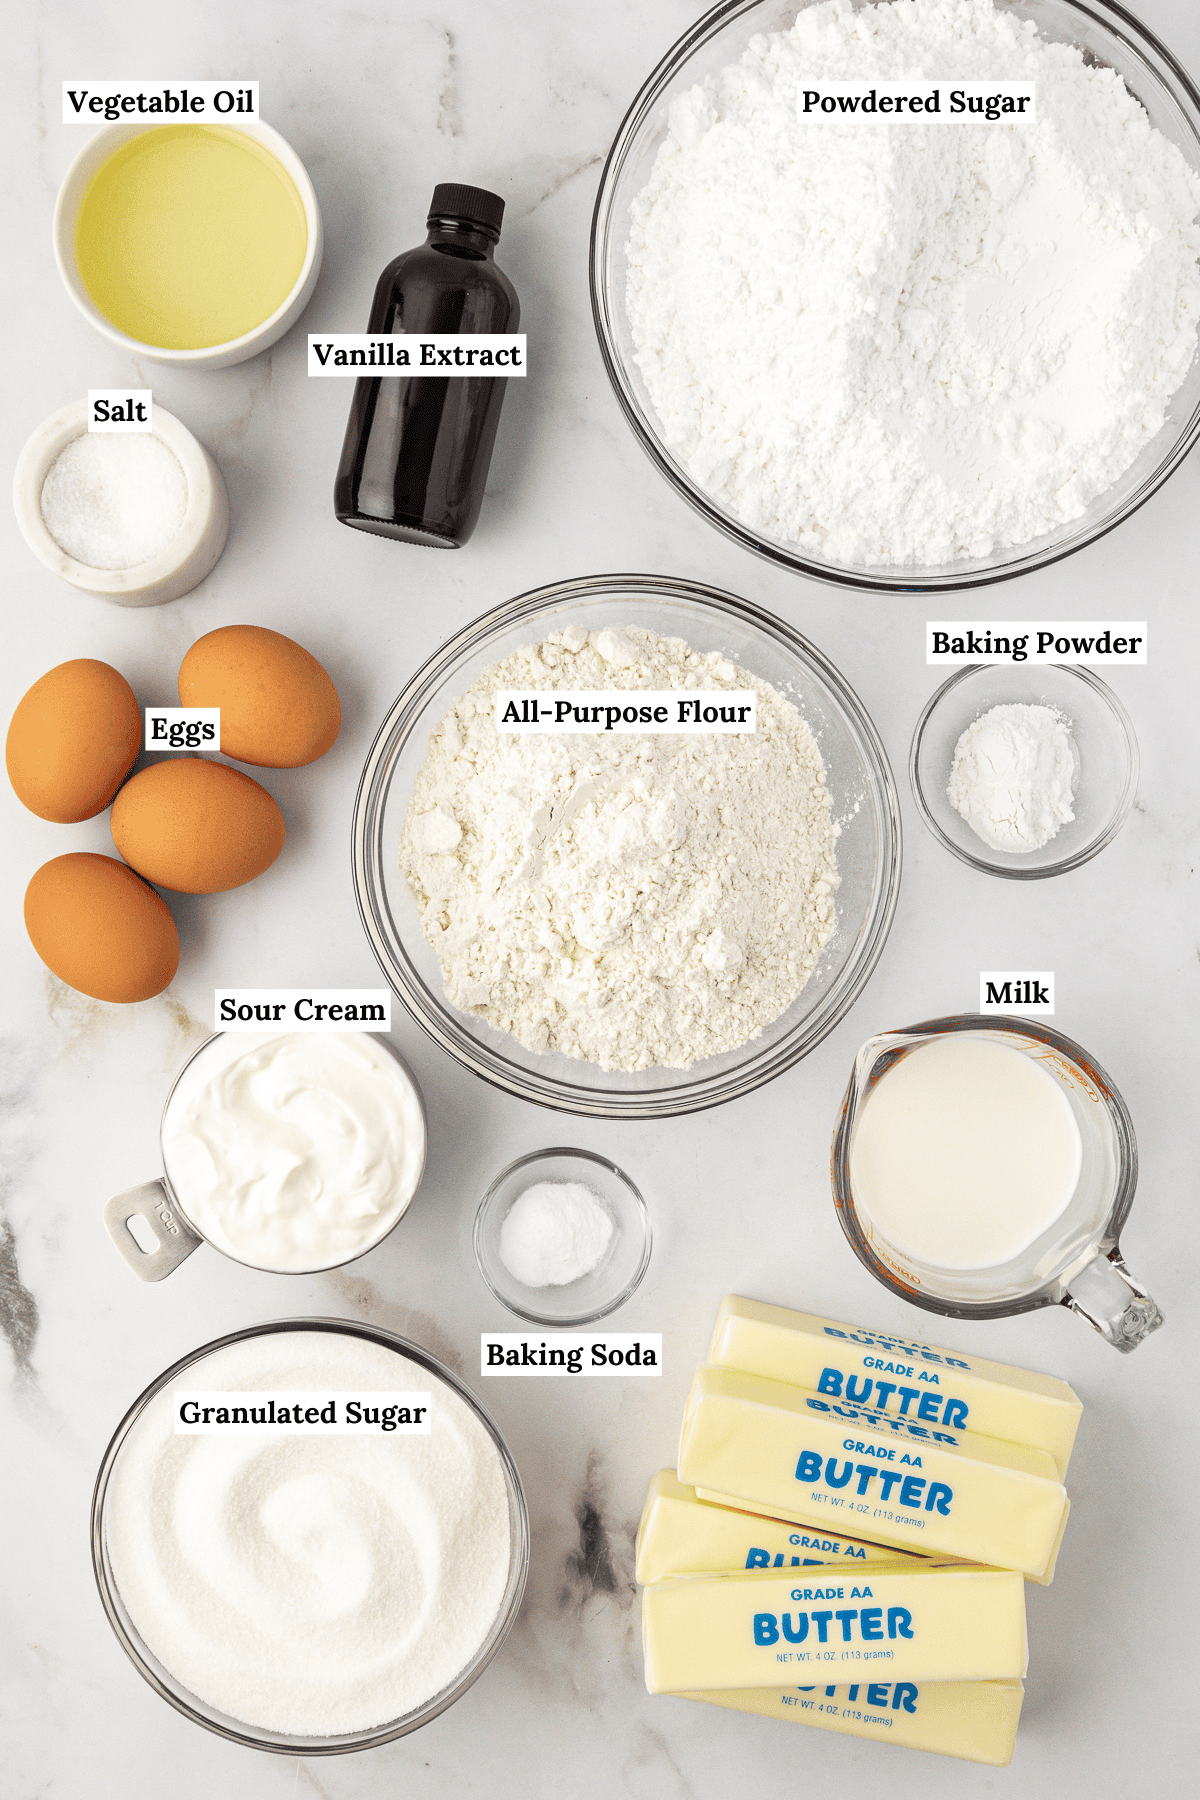 over head view of ingredients for vanilla cake including vegetable oil, powdered sugar, vanilla extract, salt, eggs, all-purpose flour, baking powder, sour cream, baking soda, milk, granulated sugar, and butter